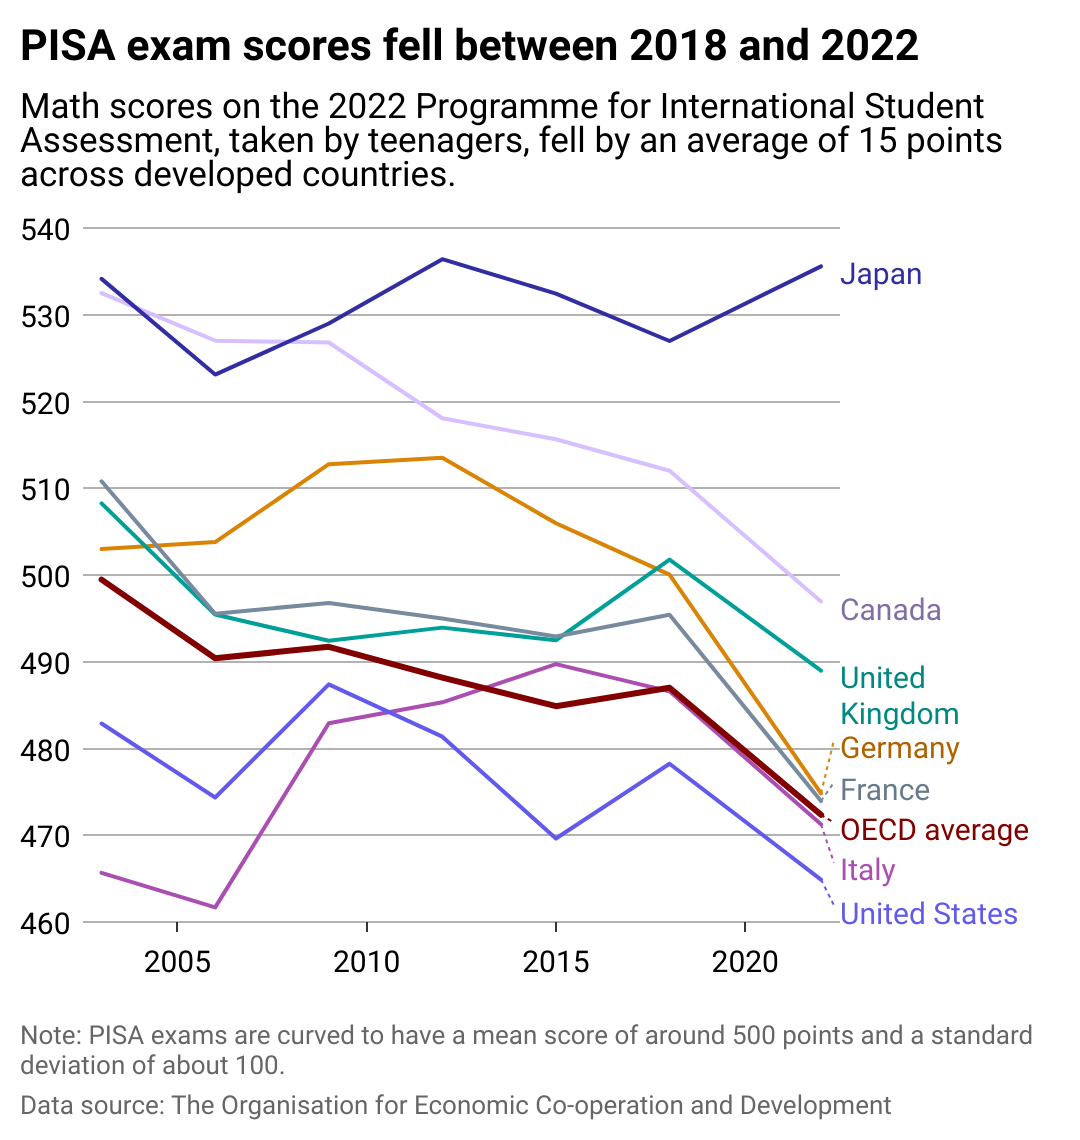 A line chart showing math scores falling between 2018 and 2022 in the United States, United Kingdom, France, Germany, Canada, and Italy on the Programme for International Assessment. Scores in Japan actually rose during this period.